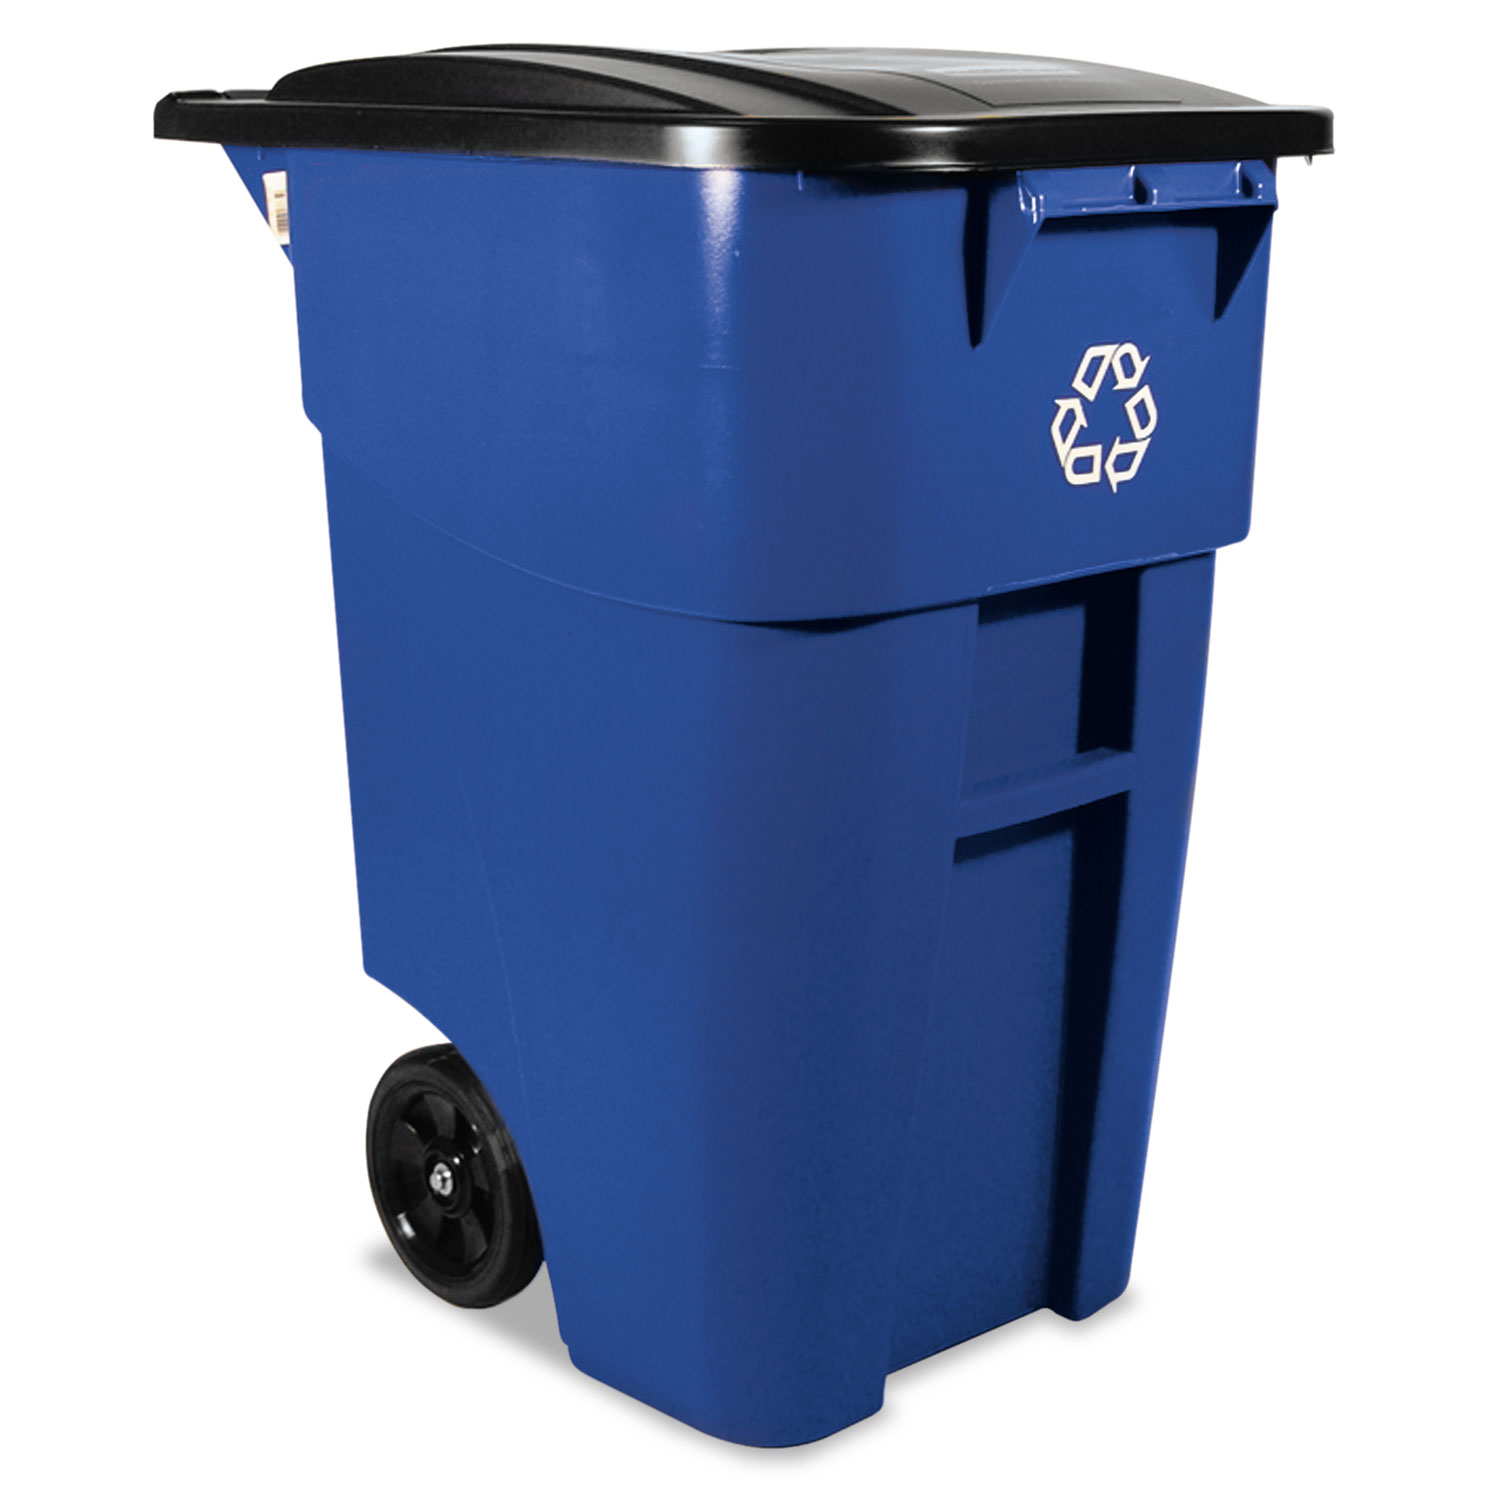  Rubbermaid Commercial 9W2773BLUE Brute Recycling Rollout Container, Square, 50 gal, Blue (RCP9W2773BLU) 